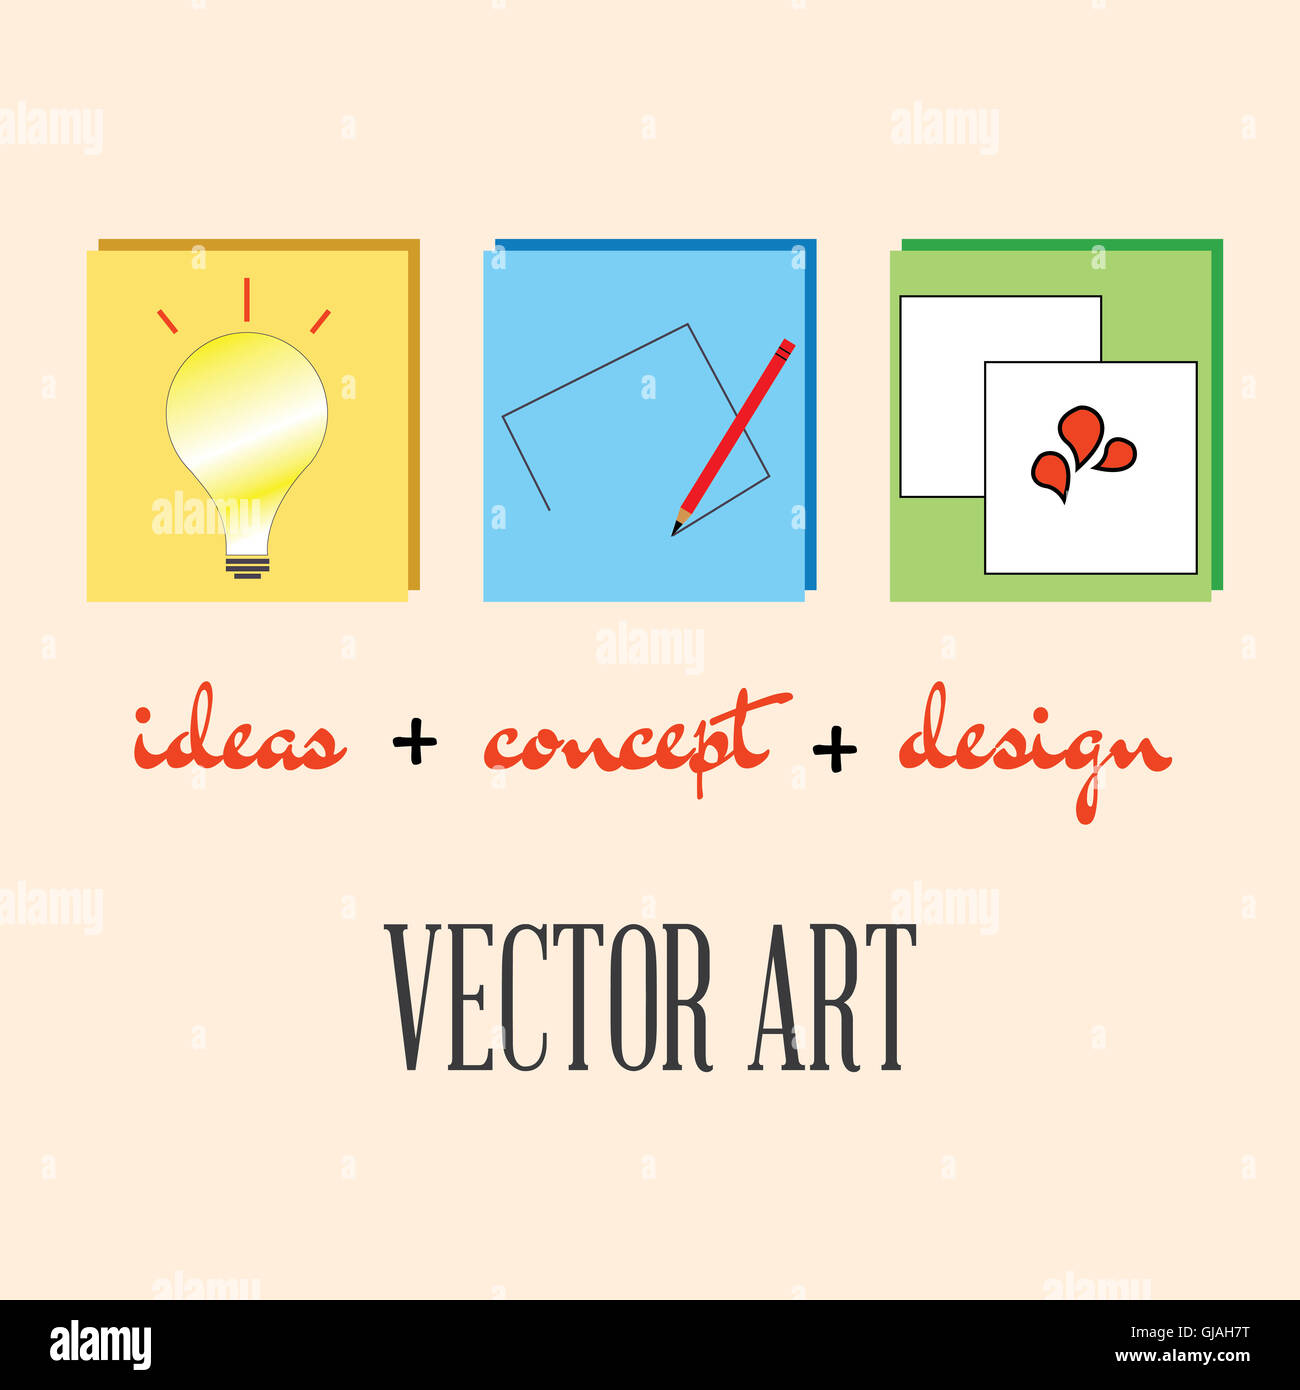 Vector art is derived from three steps- ideas,concept and design. Stock Photo